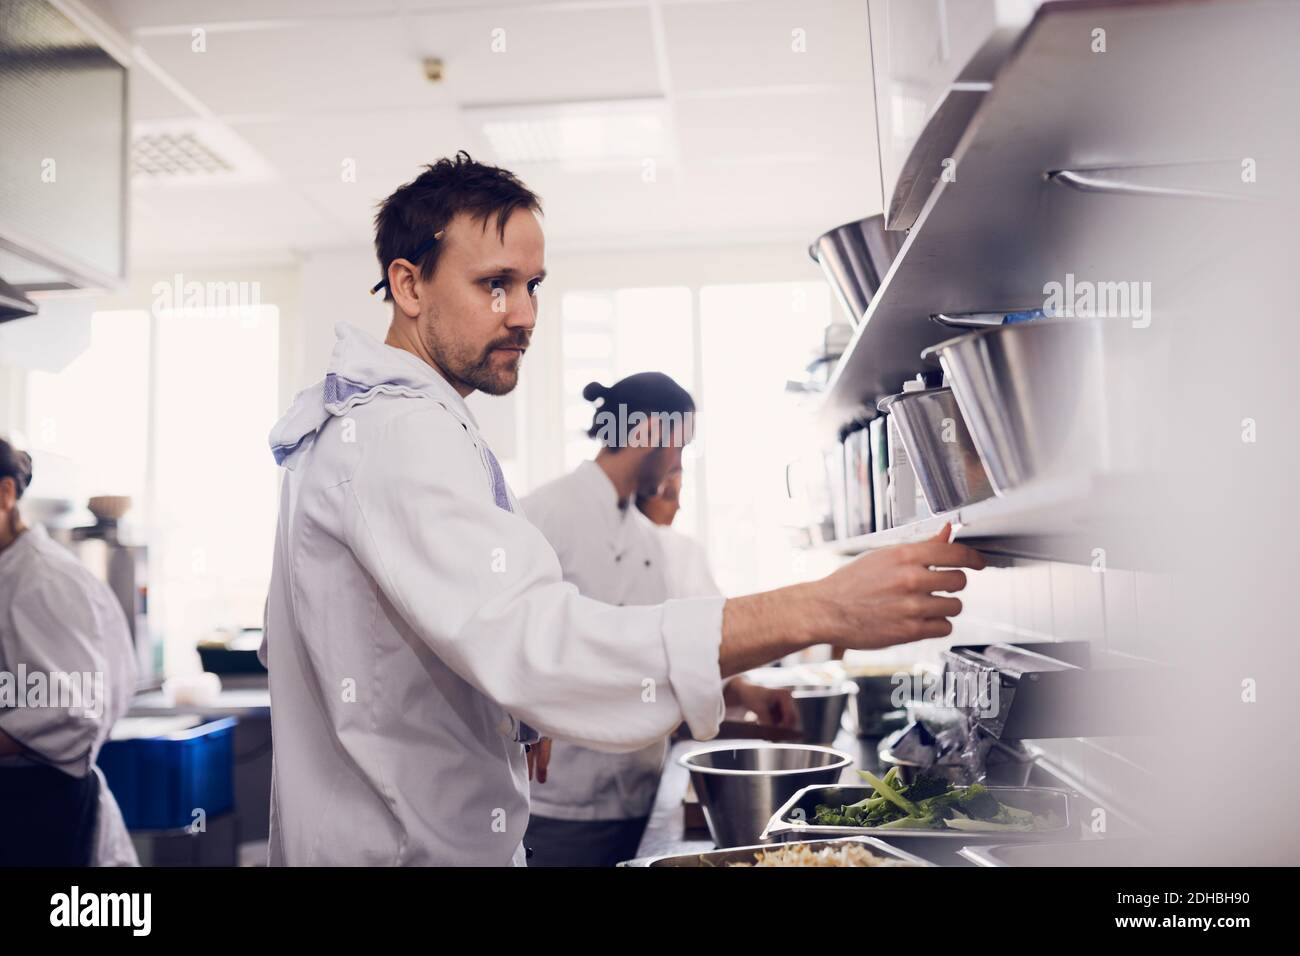 Young male chef reading order ticket in commercial kitchen Stock Photo